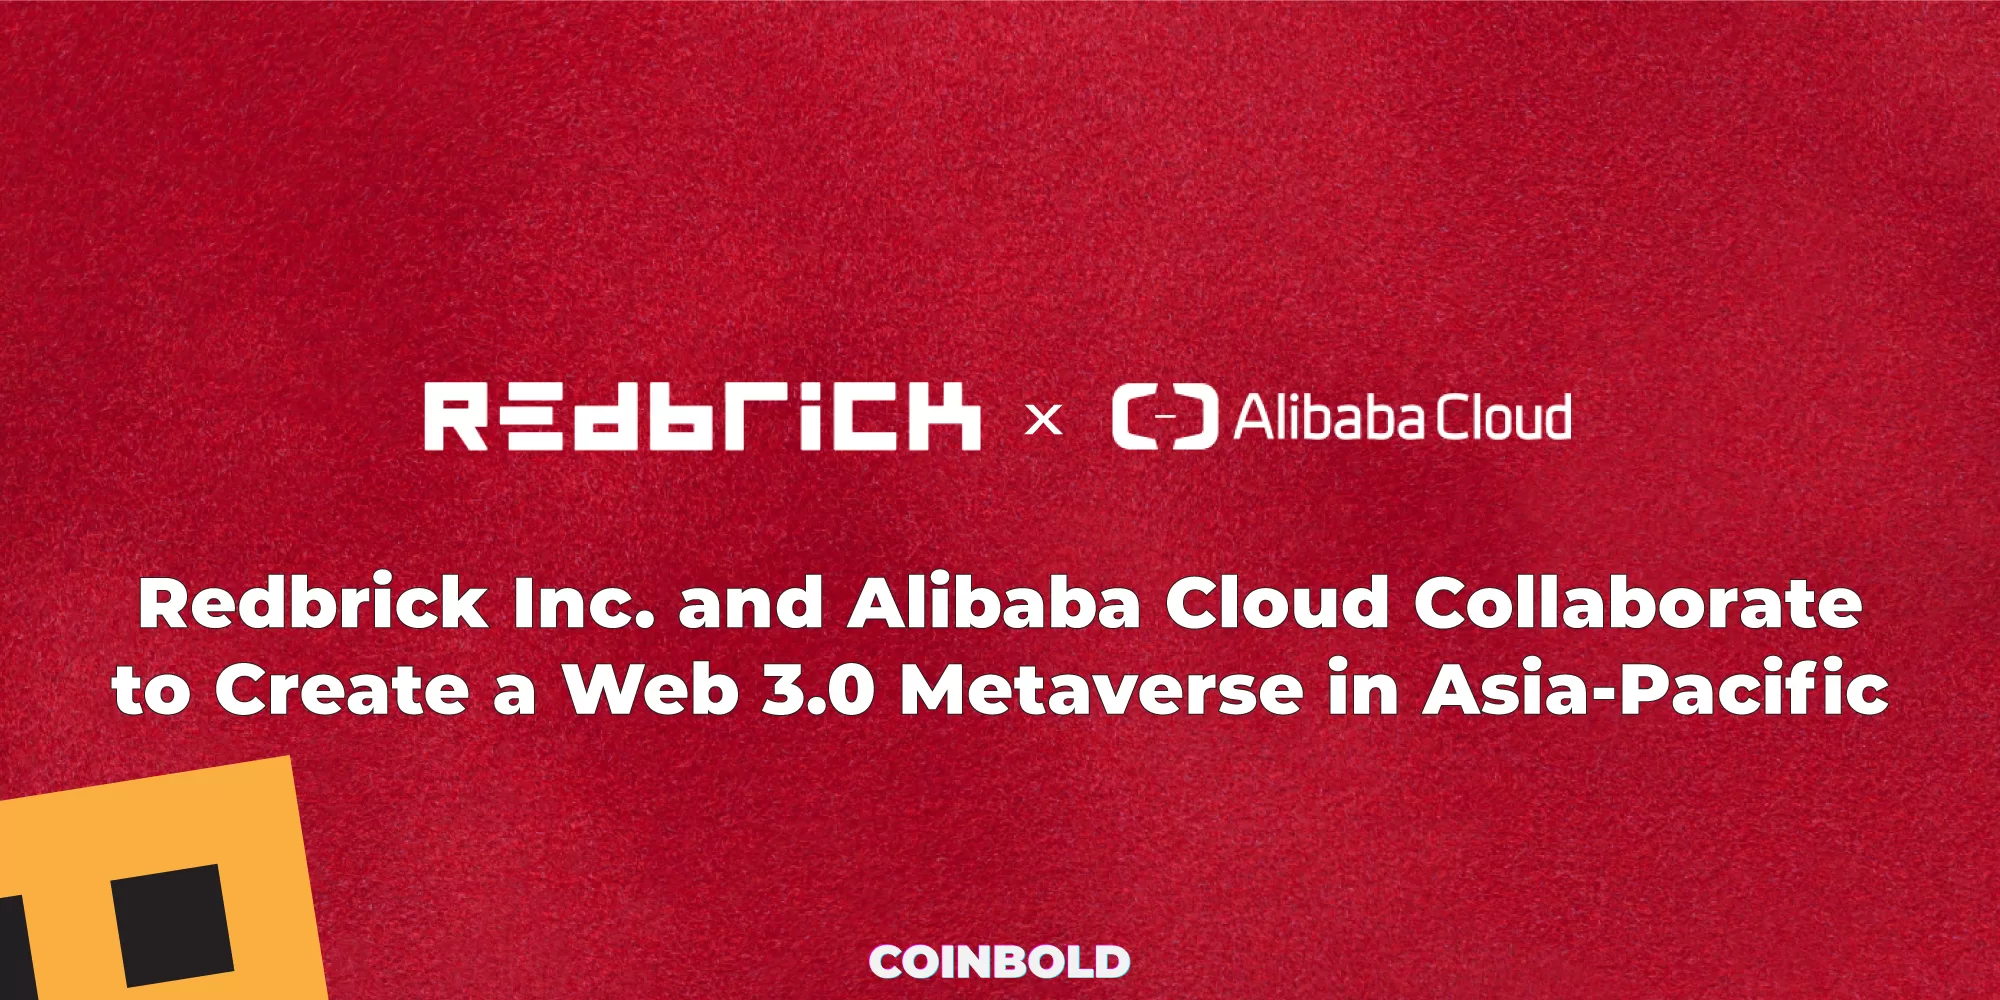 Redbrick Inc. and Alibaba Cloud Collaborate to Create a Web 3.0 Metaverse in Asia-Pacific